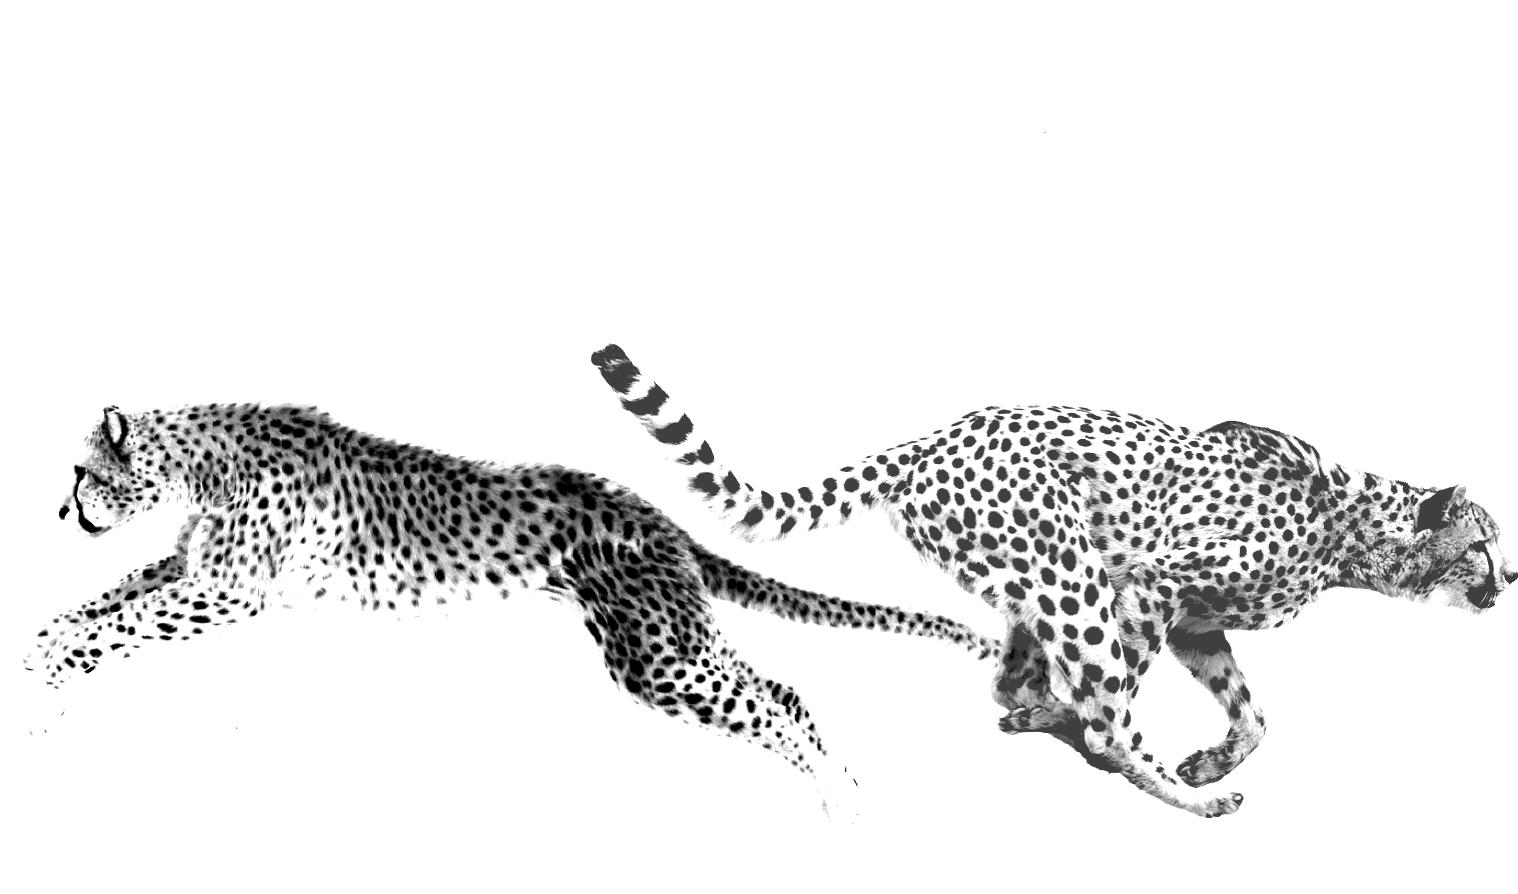 Two running cheetahs representing Duo's fast multi-factor authentication (MFA) deployment.